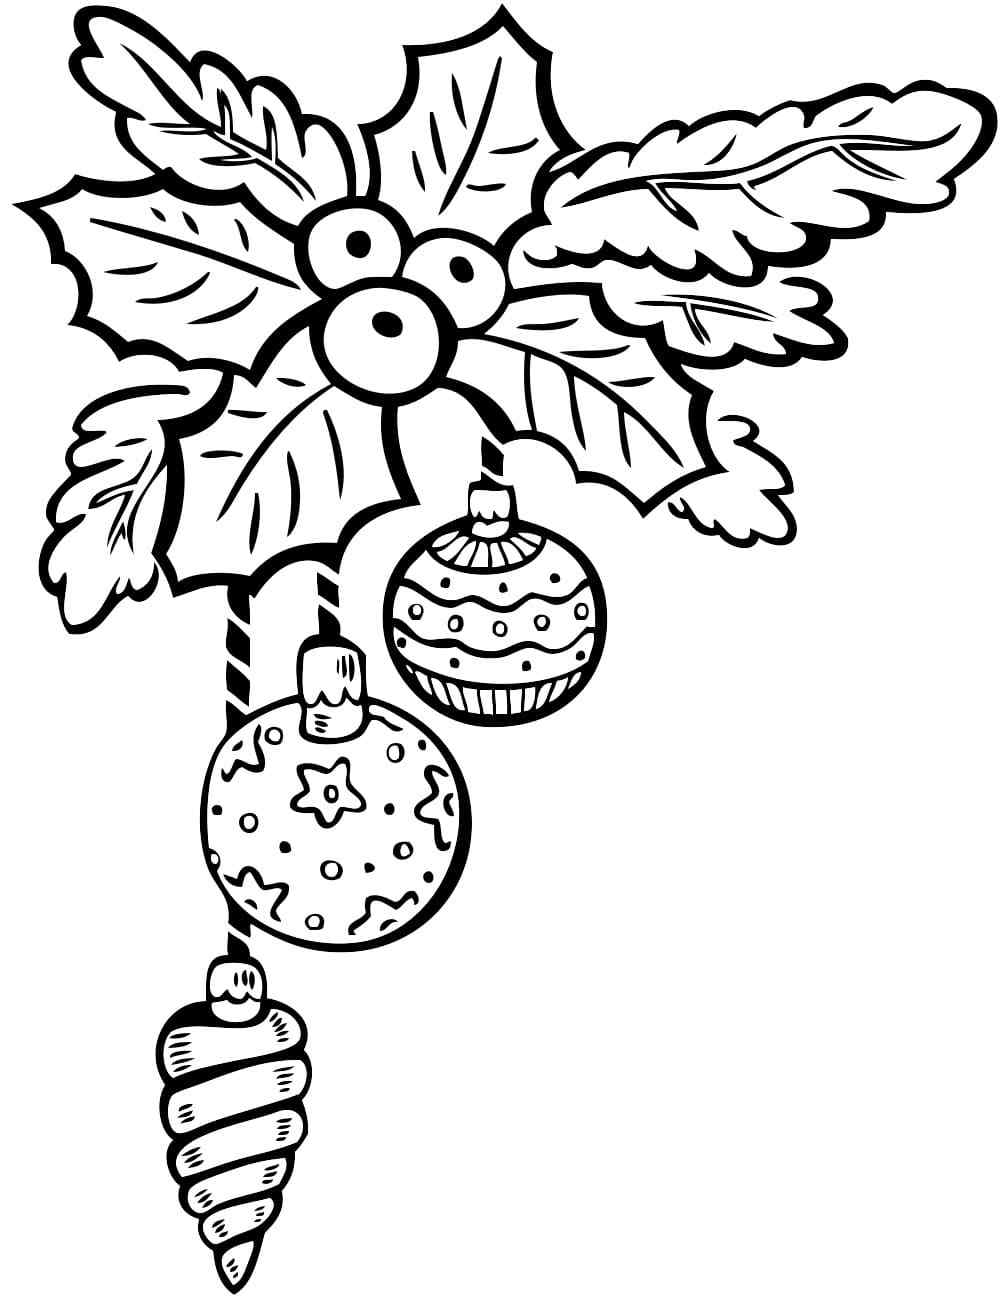 The Branches Of The Spruce. Coloring Page